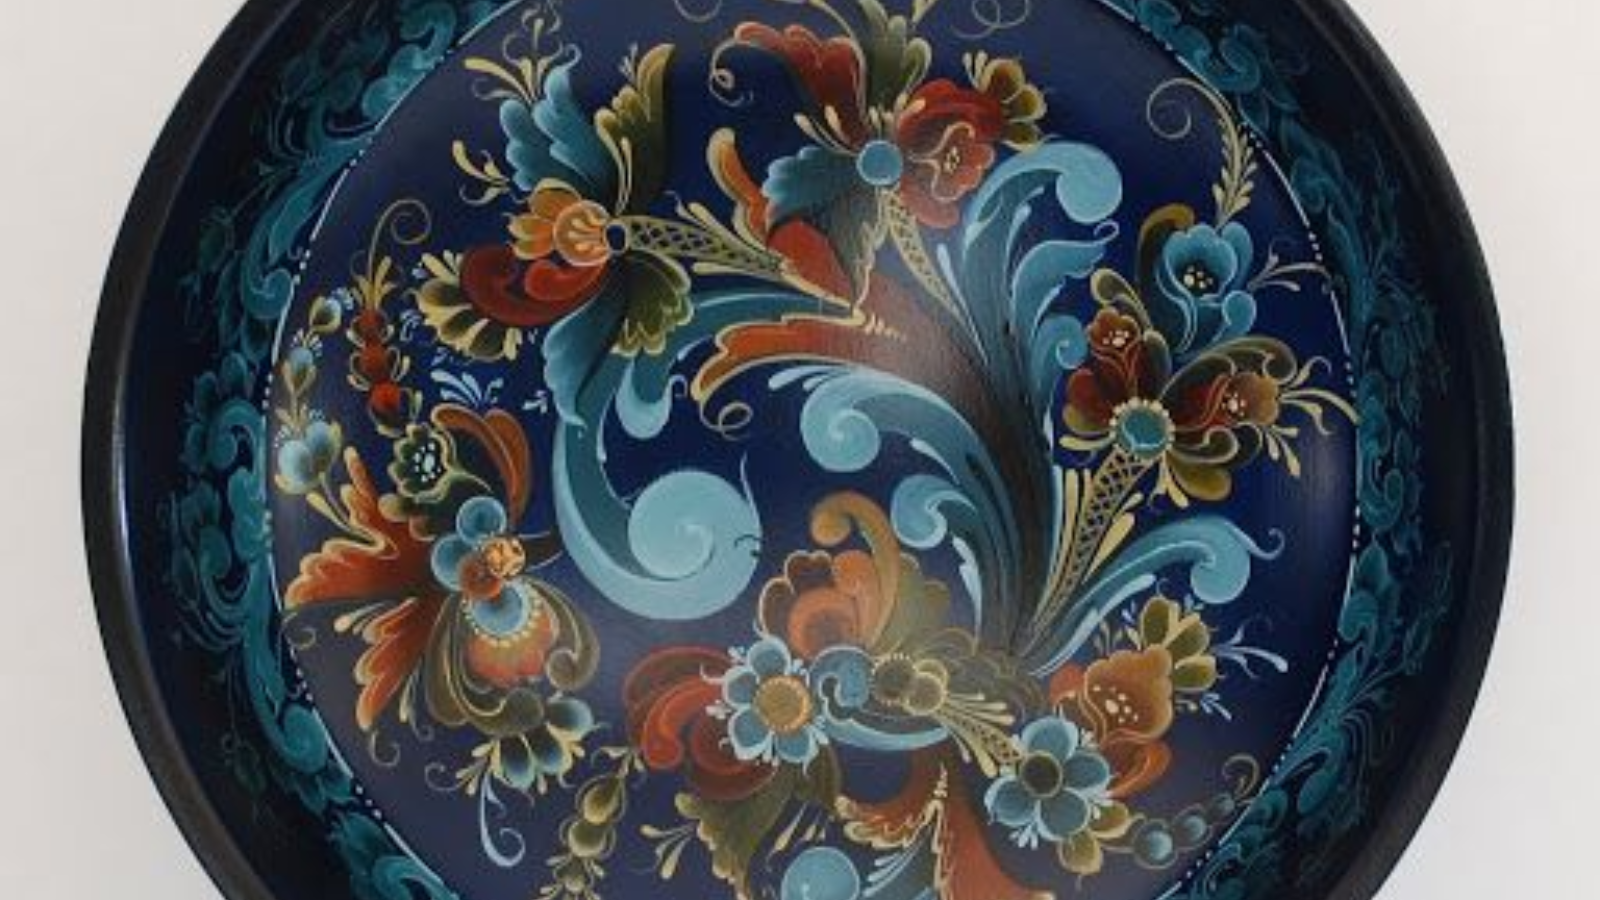 Rosemaling Art - gifts from coach rental in Norway